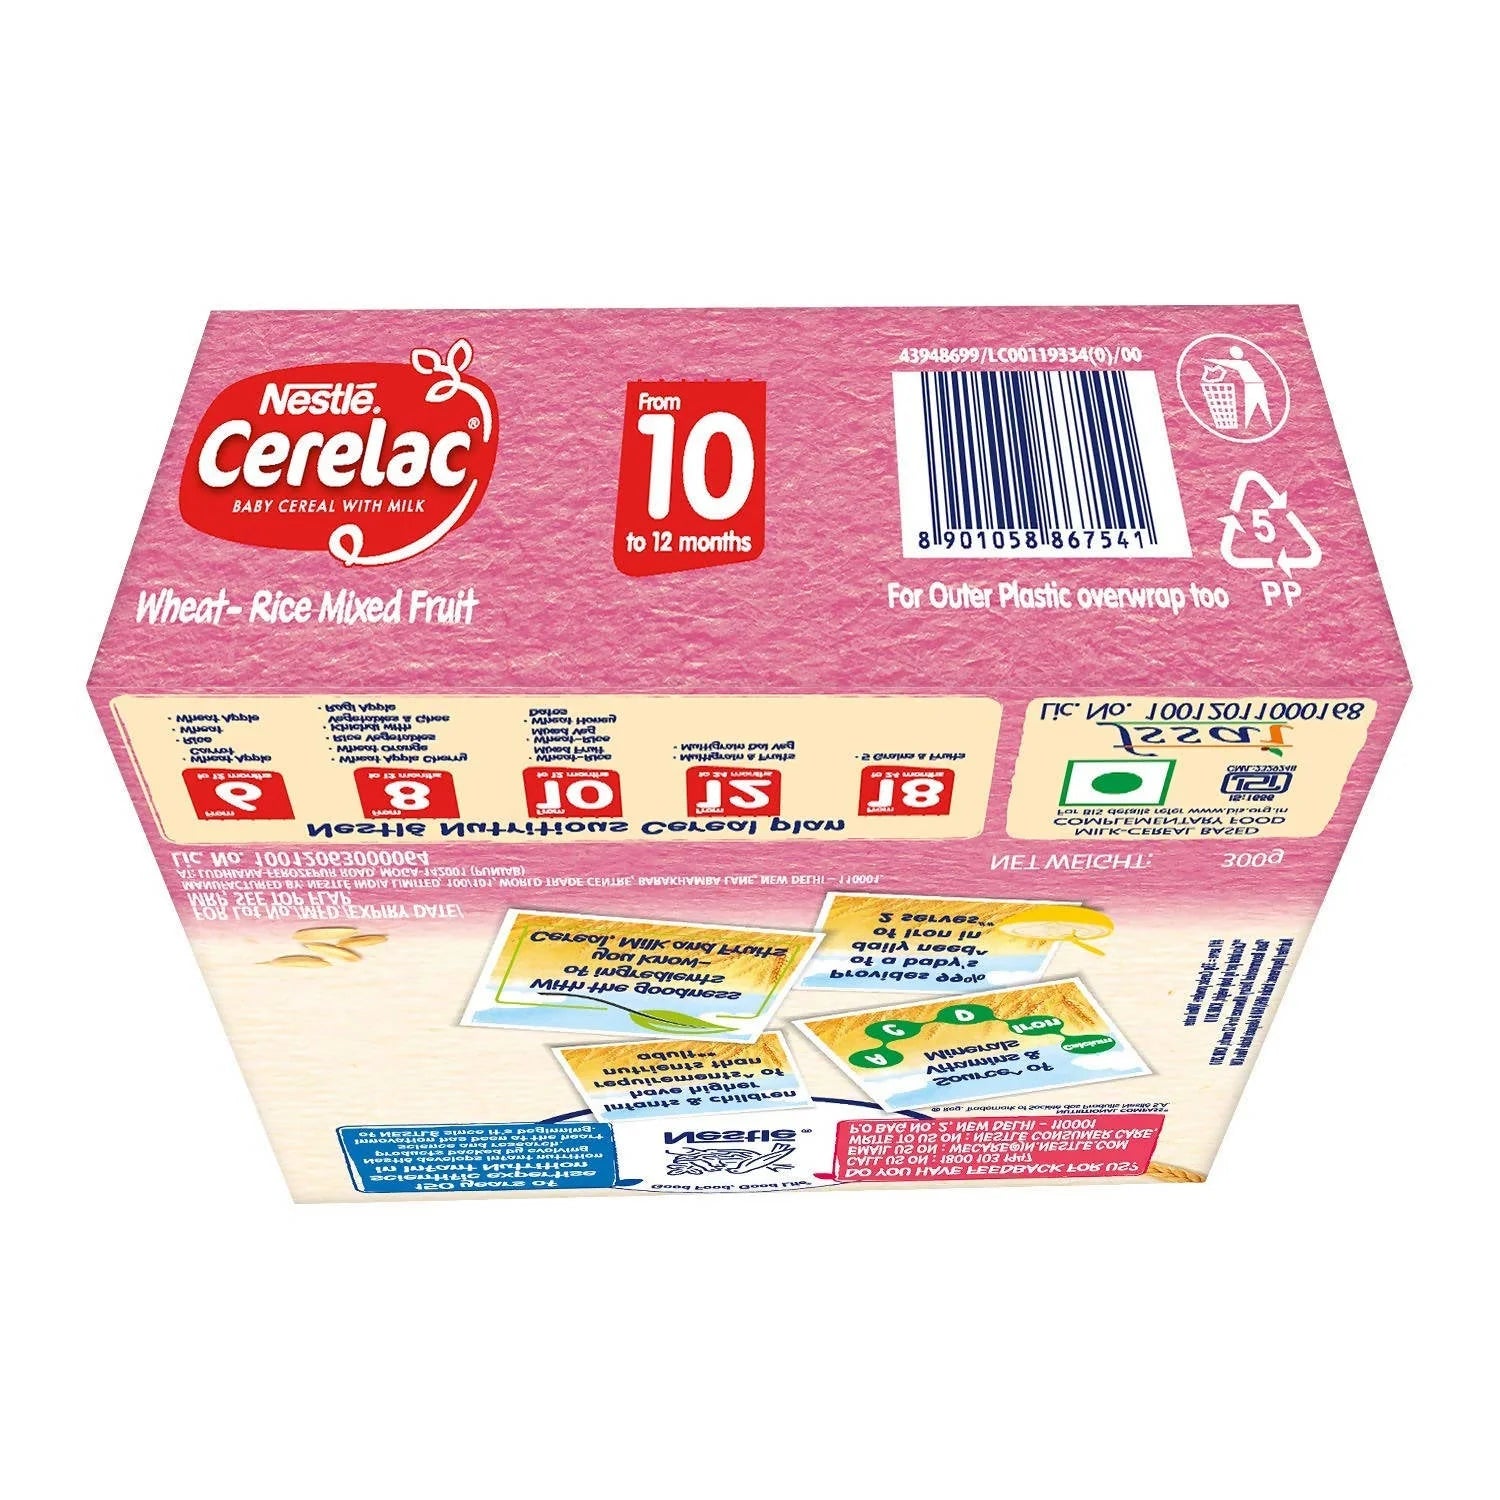 Nestle Cerelac Baby Cereal With Milk Wheat - Rice Mixed Fruit